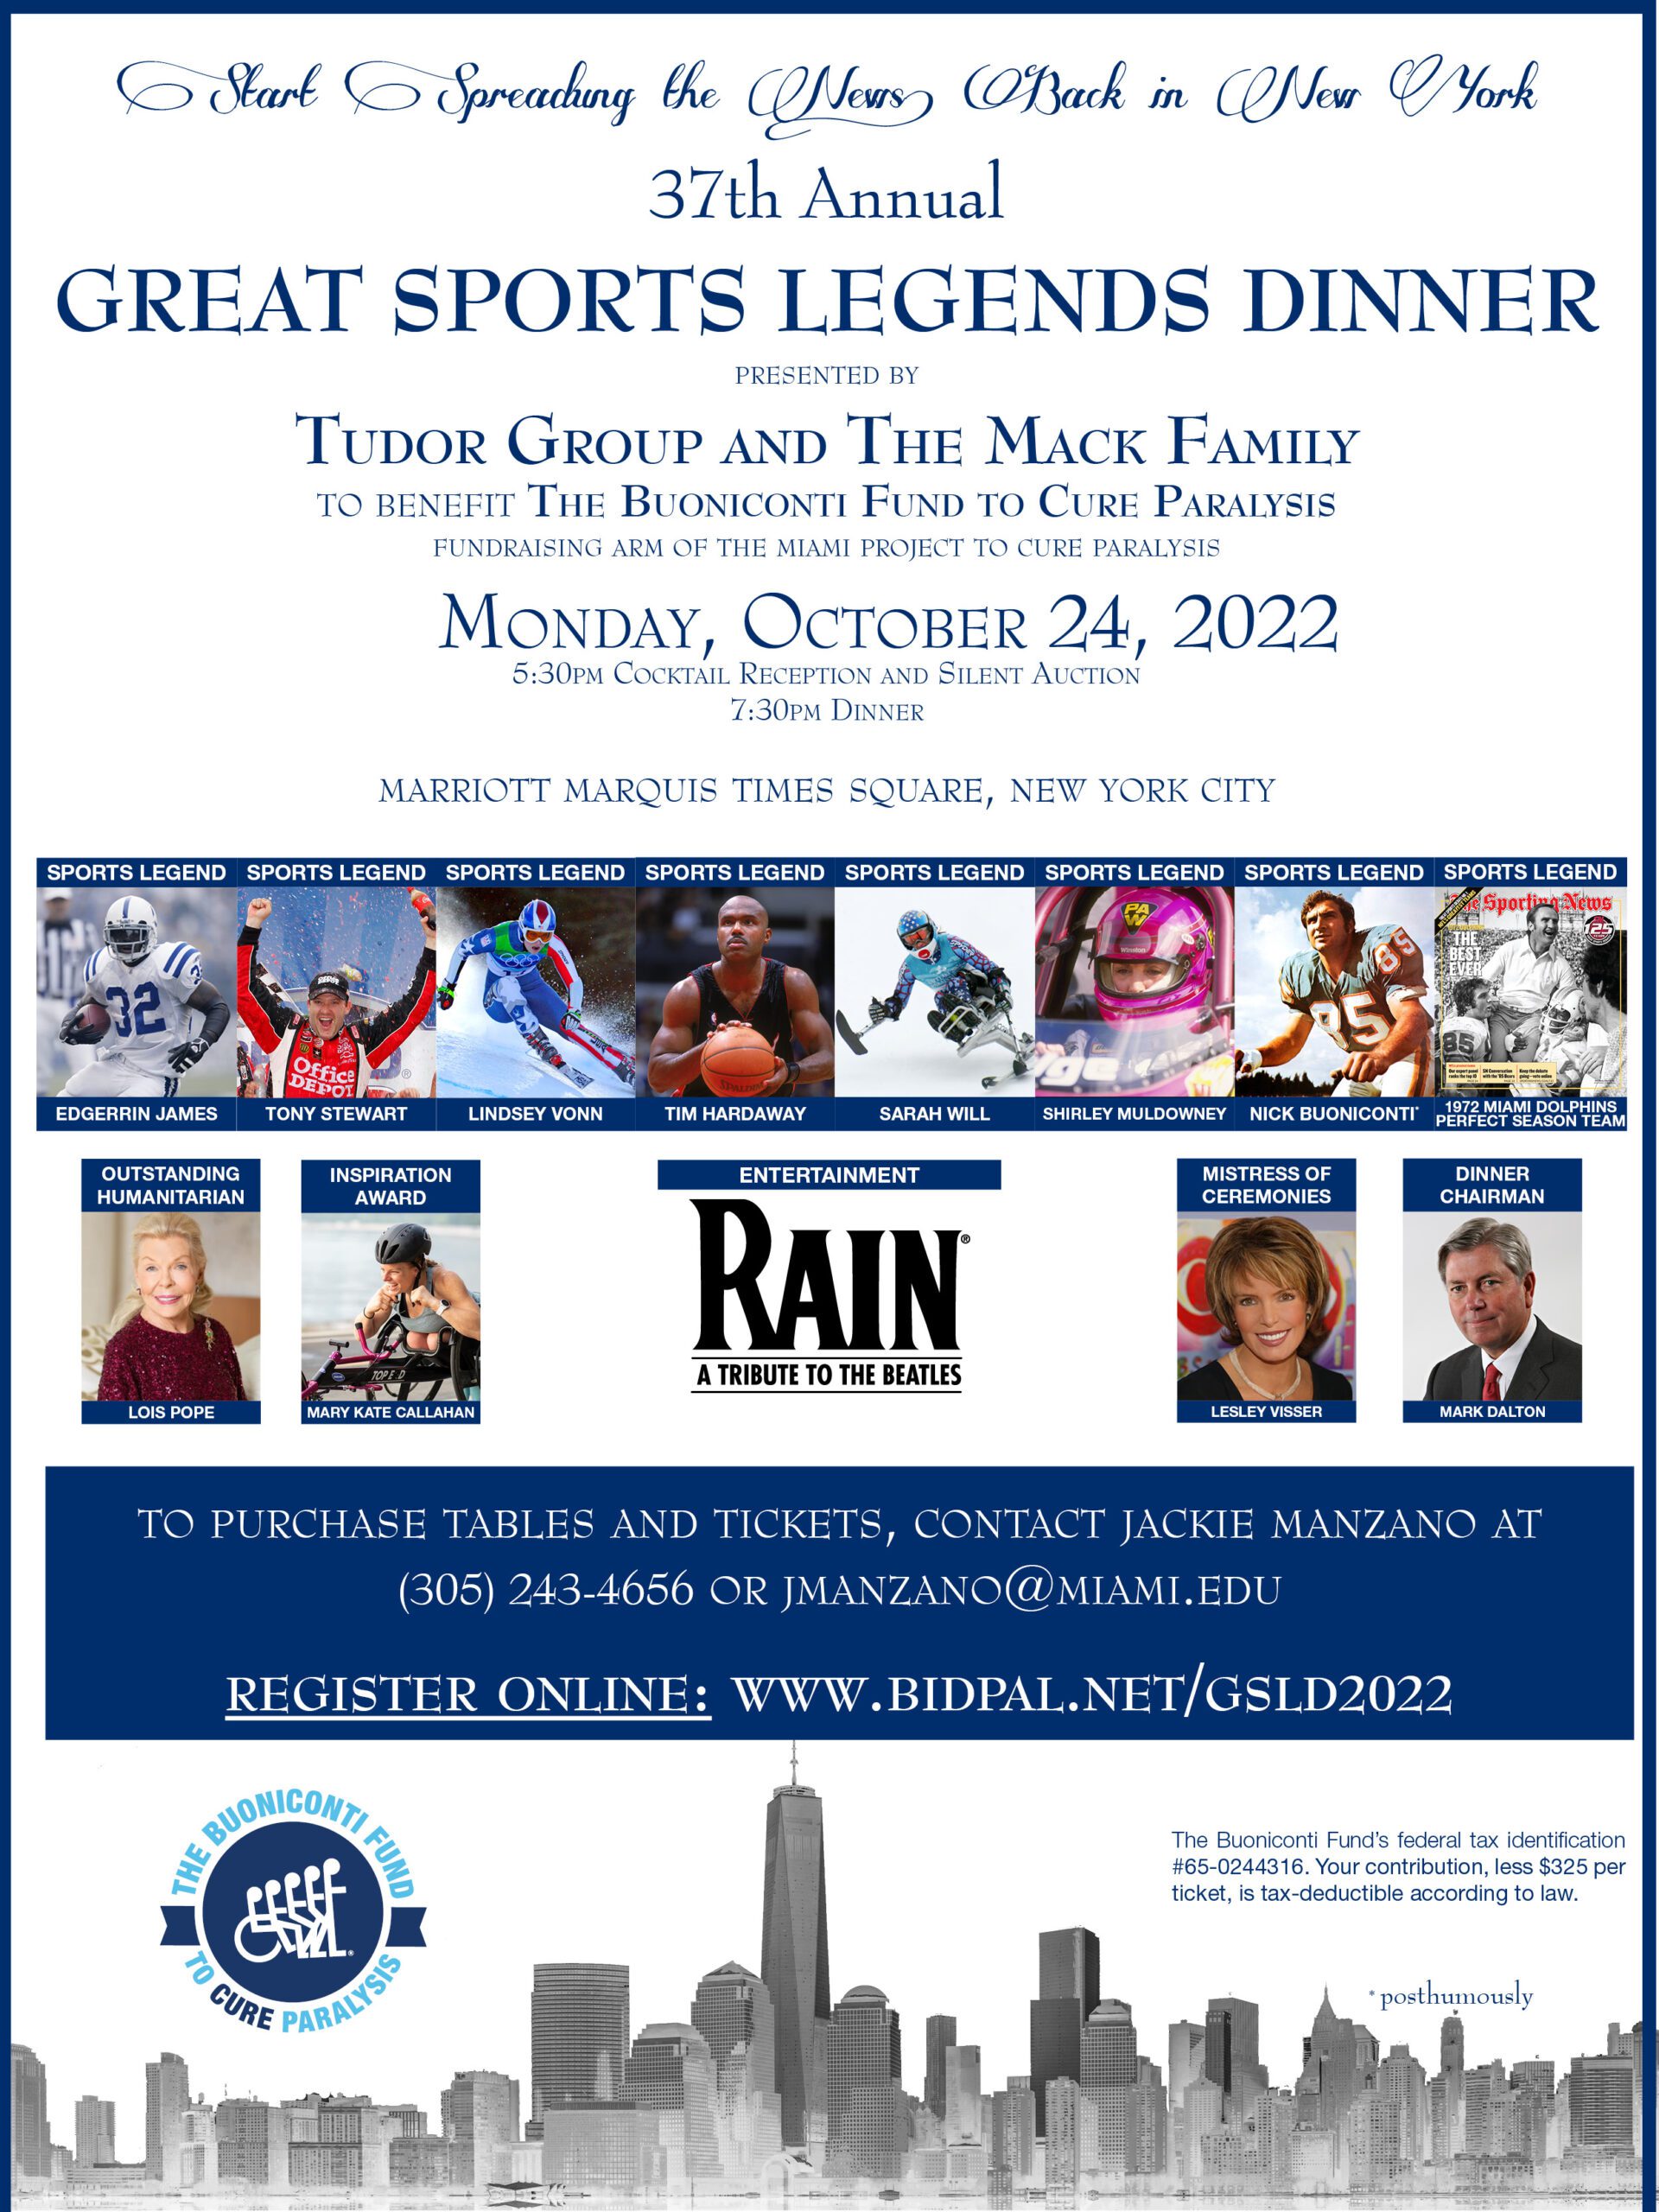 37th Annual Great Sports Legends Dinner